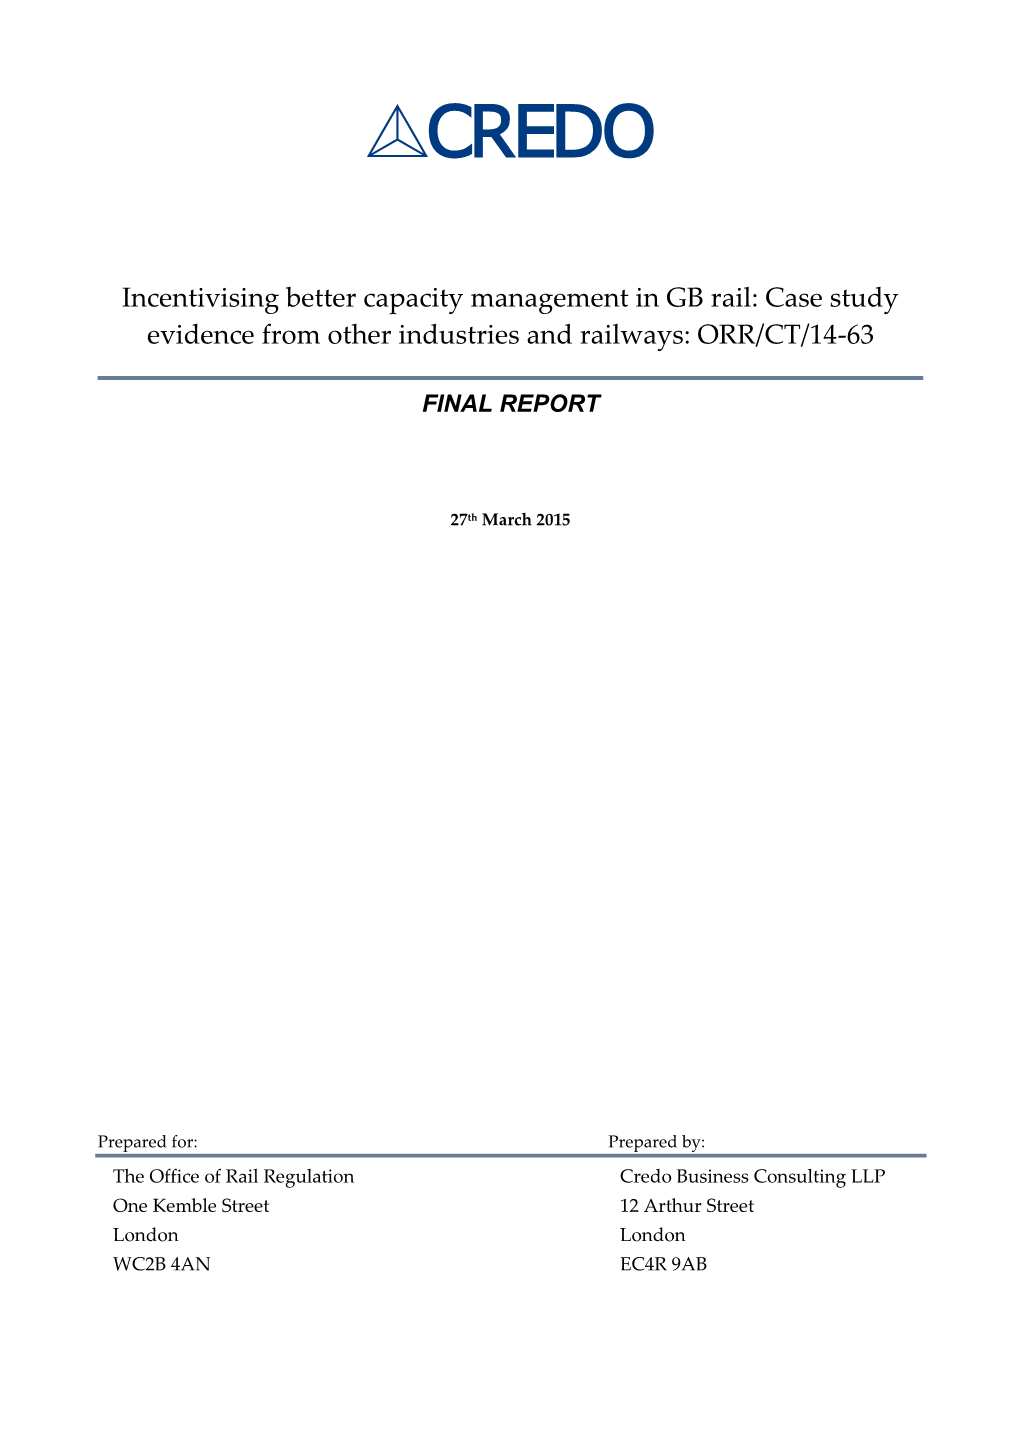 Incentivising Better Capacity Management in GB Rail: Case Study Evidence from Other Industries and Railways: ORR/CT/14-63